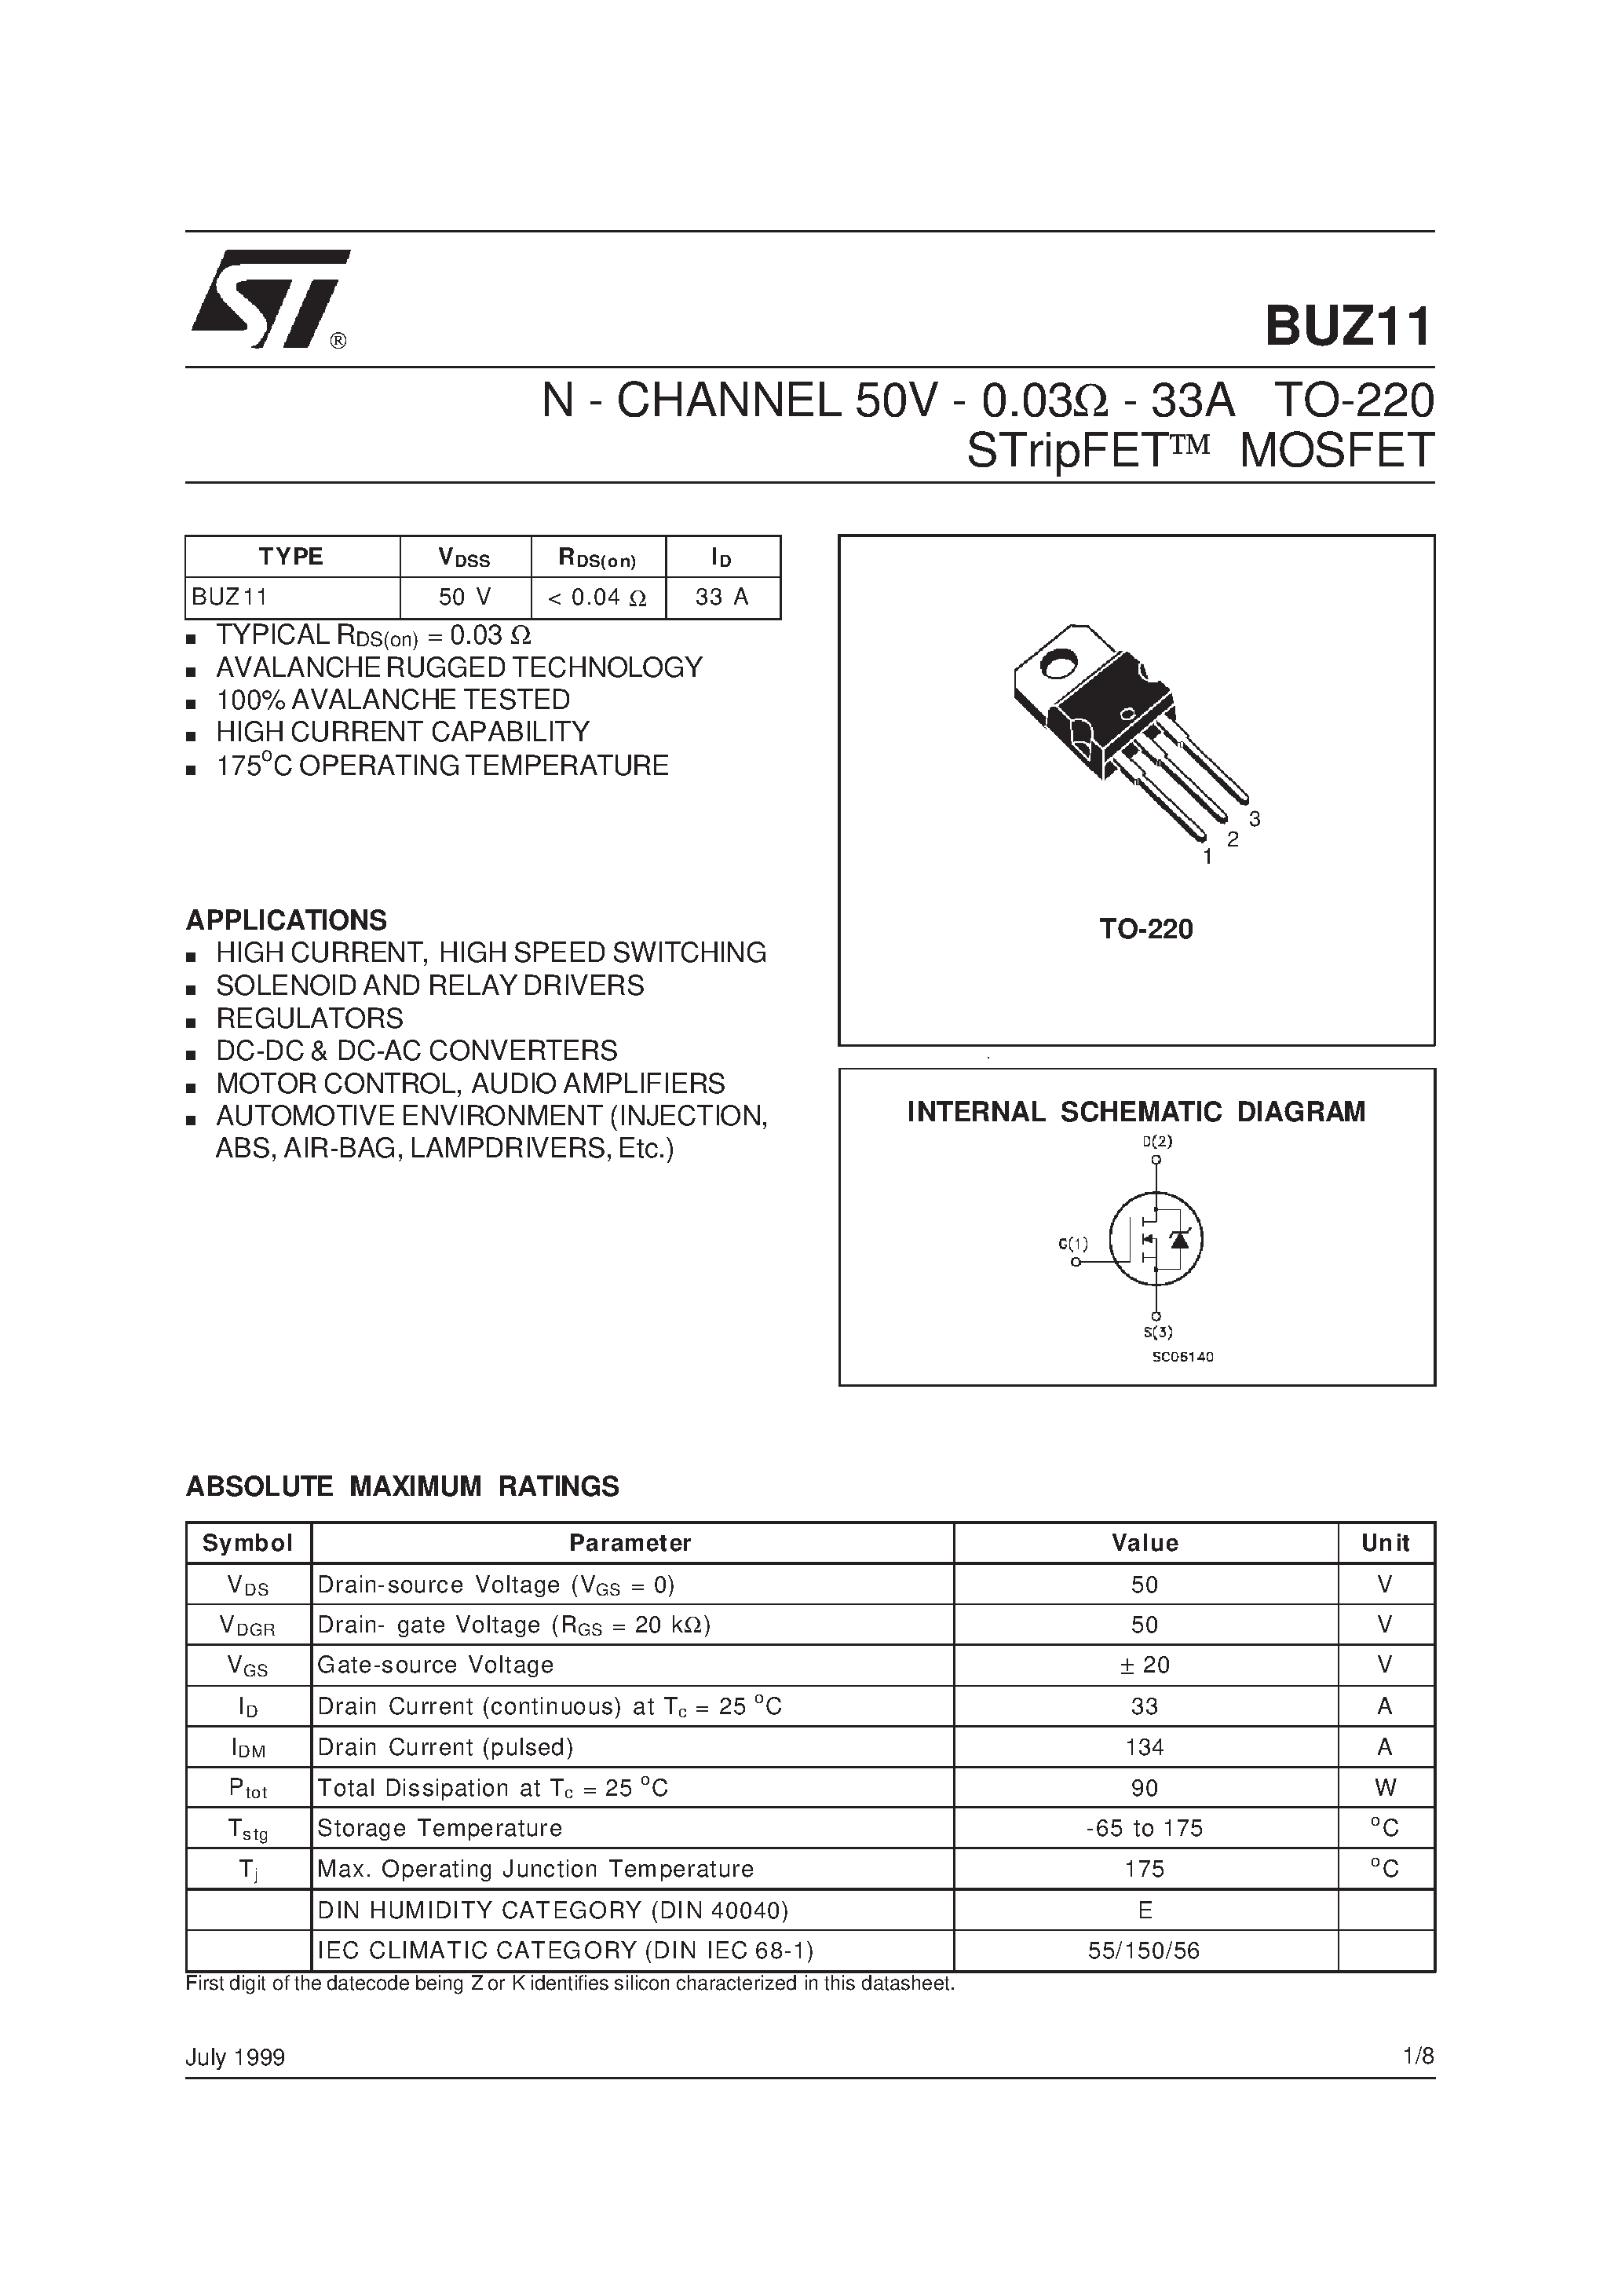 Datasheet BUZ11 - N - CHANNEL 50V - 0.03W - 33A TO-220 STripFET] MOSFET page 1